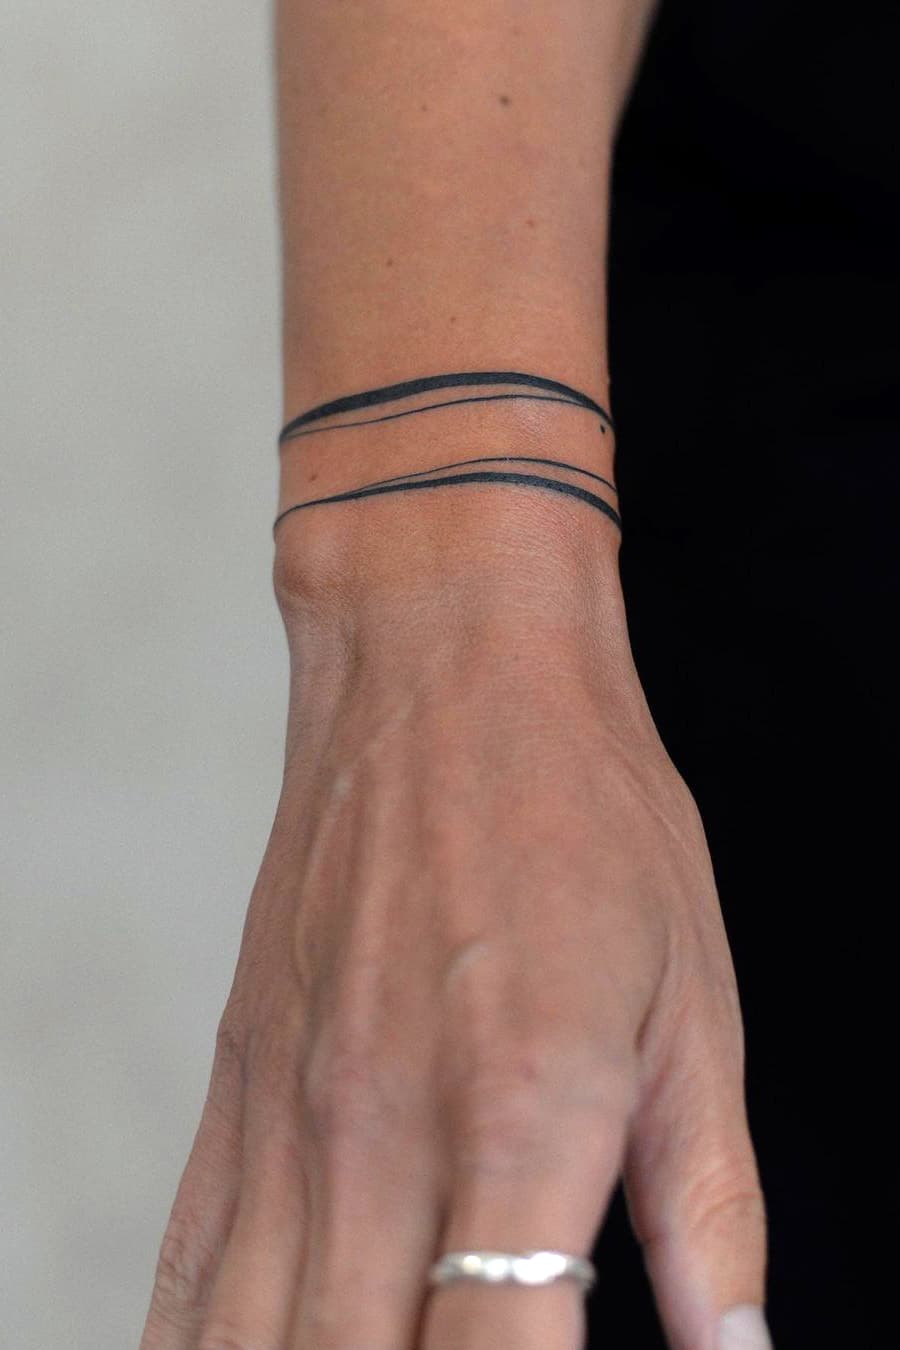 Abstract Parallel Line Bracelet Tattoo